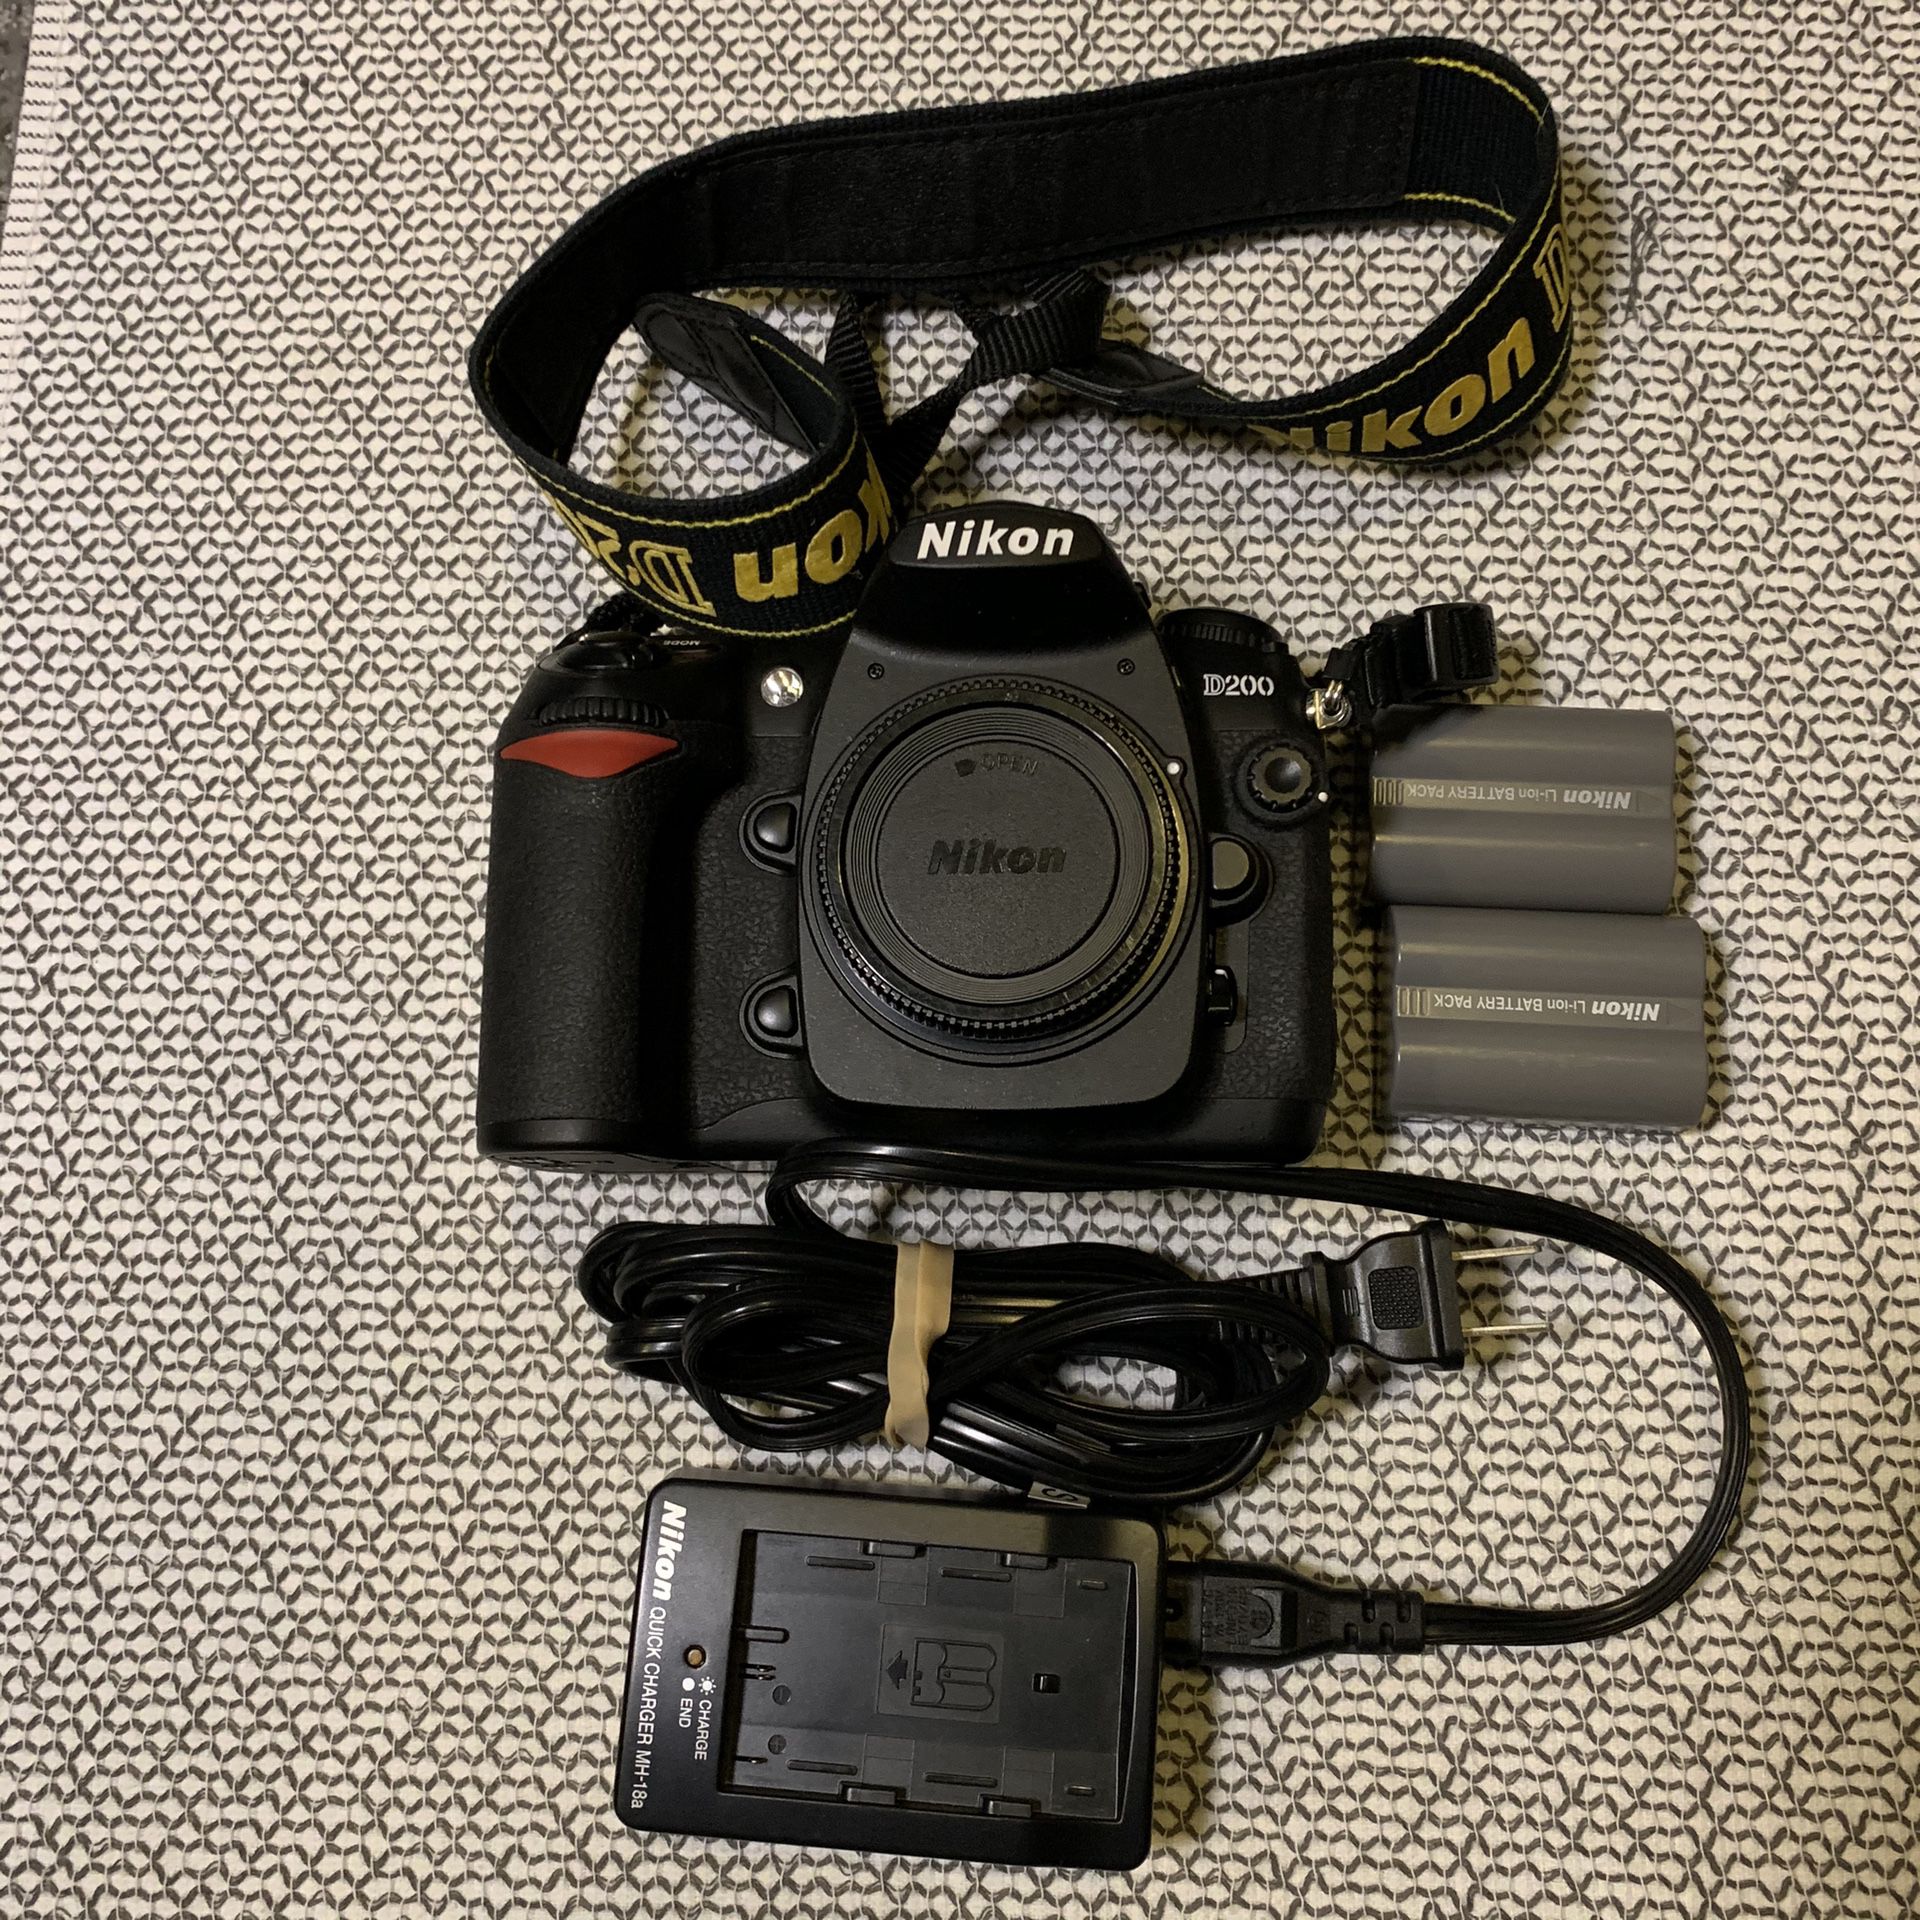 Nikon D200 DSLR Camera w/ batteries and charger